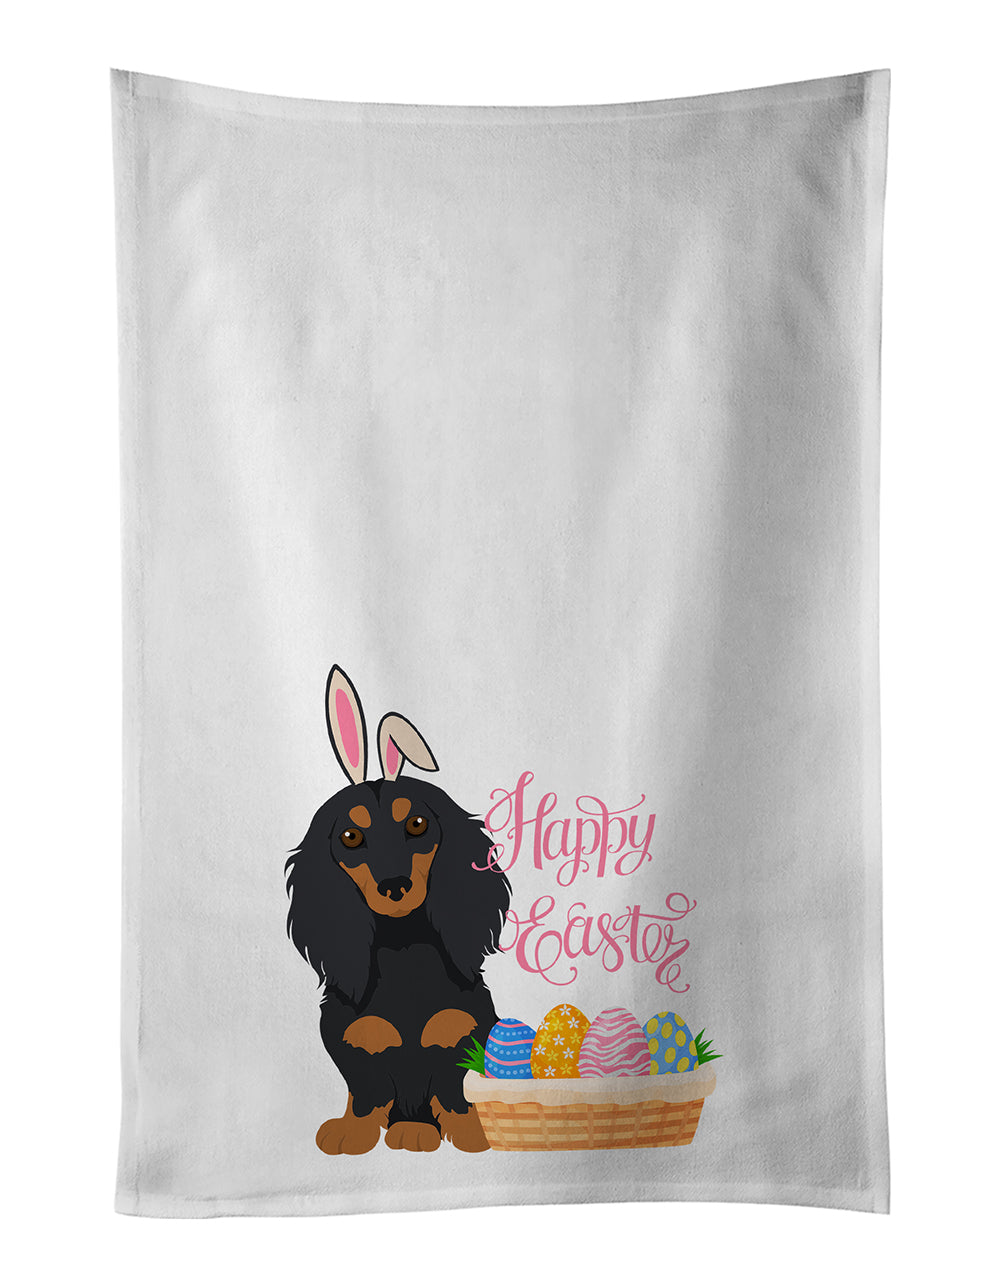 Buy this Longhair Black and Tan Dachshund Easter White Kitchen Towel Set of 2 Dish Towels